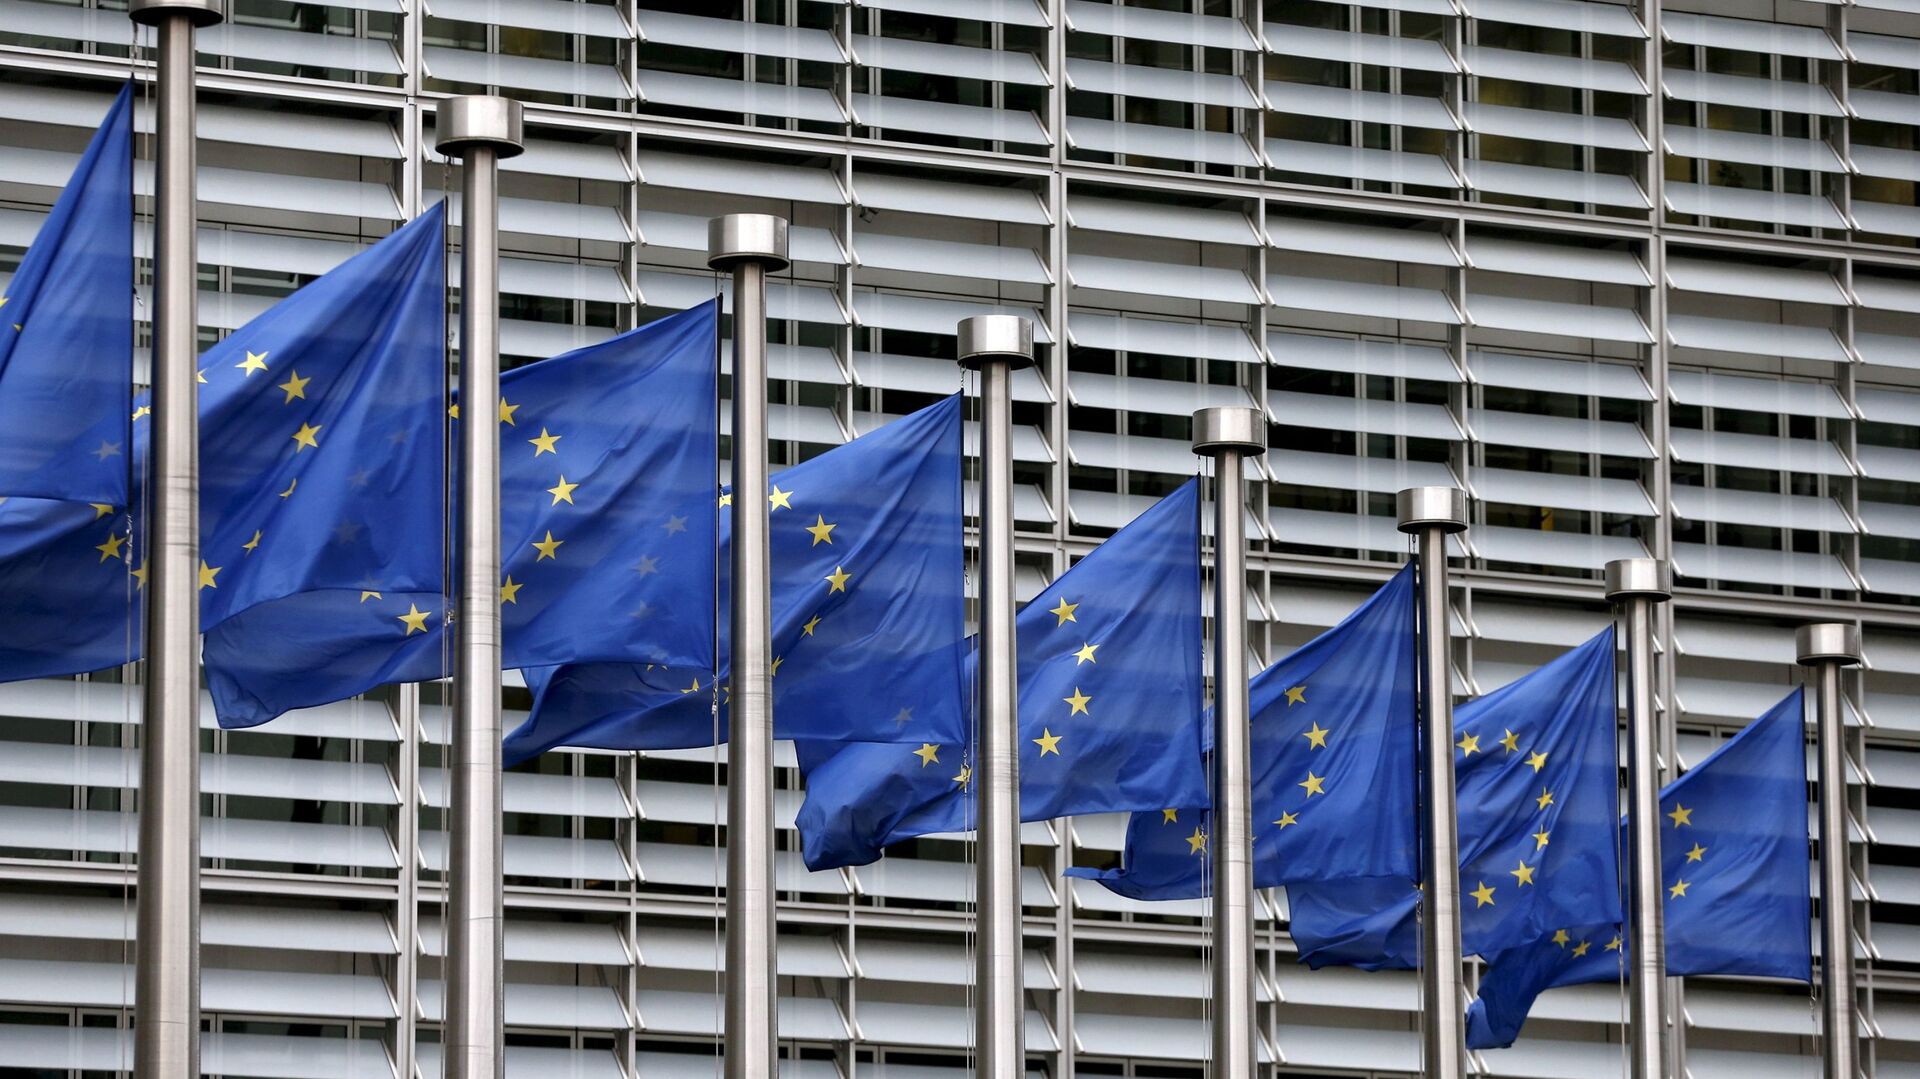 FILE PHOTO: Picture shows European Union flags fluttering outside the EU Commission headquarters in Brussels - Sputnik International, 1920, 04.06.2021